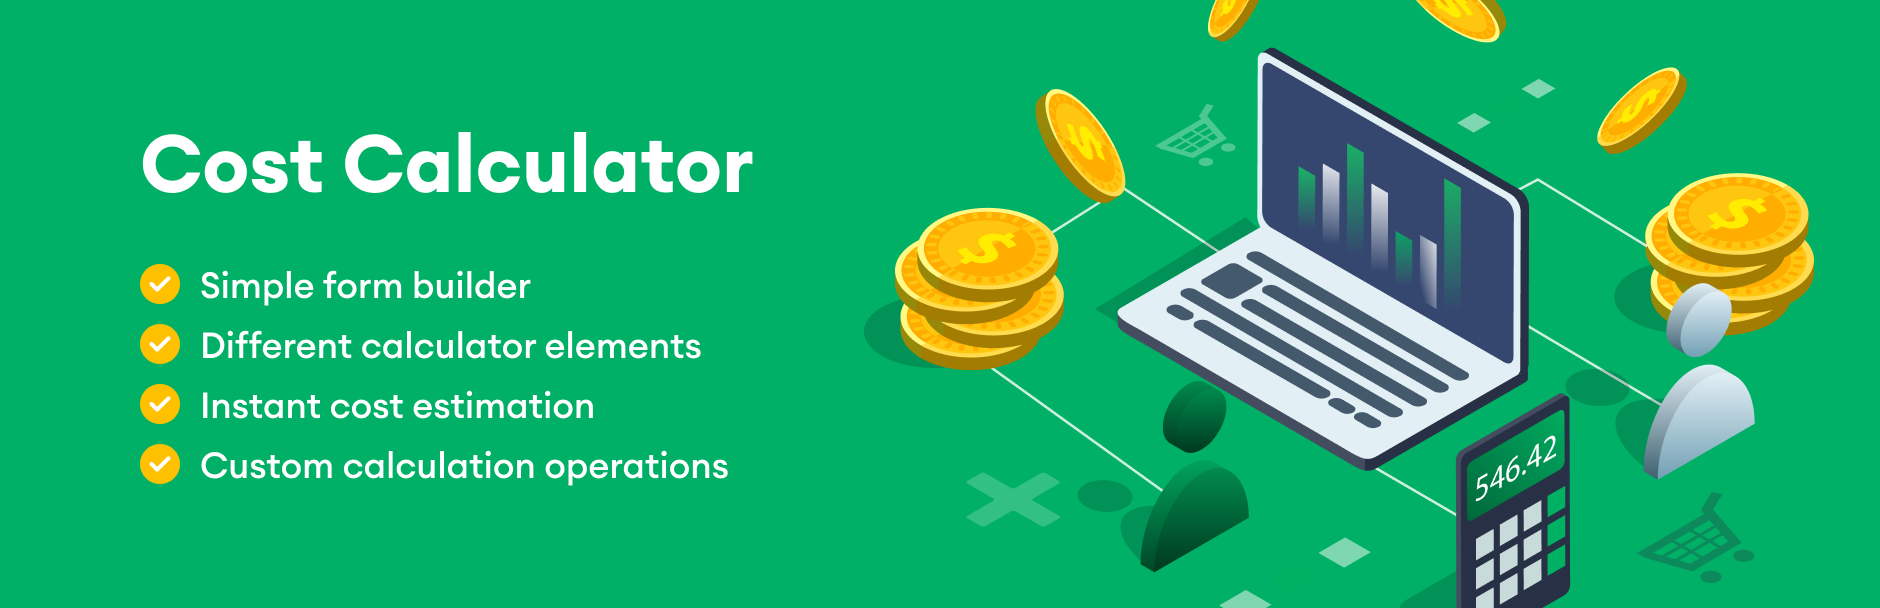 Cost Calculator Builder PRO - Cost Calculator Builder PRO v3.1.73 by Stylemixthemes Nulled Free Download